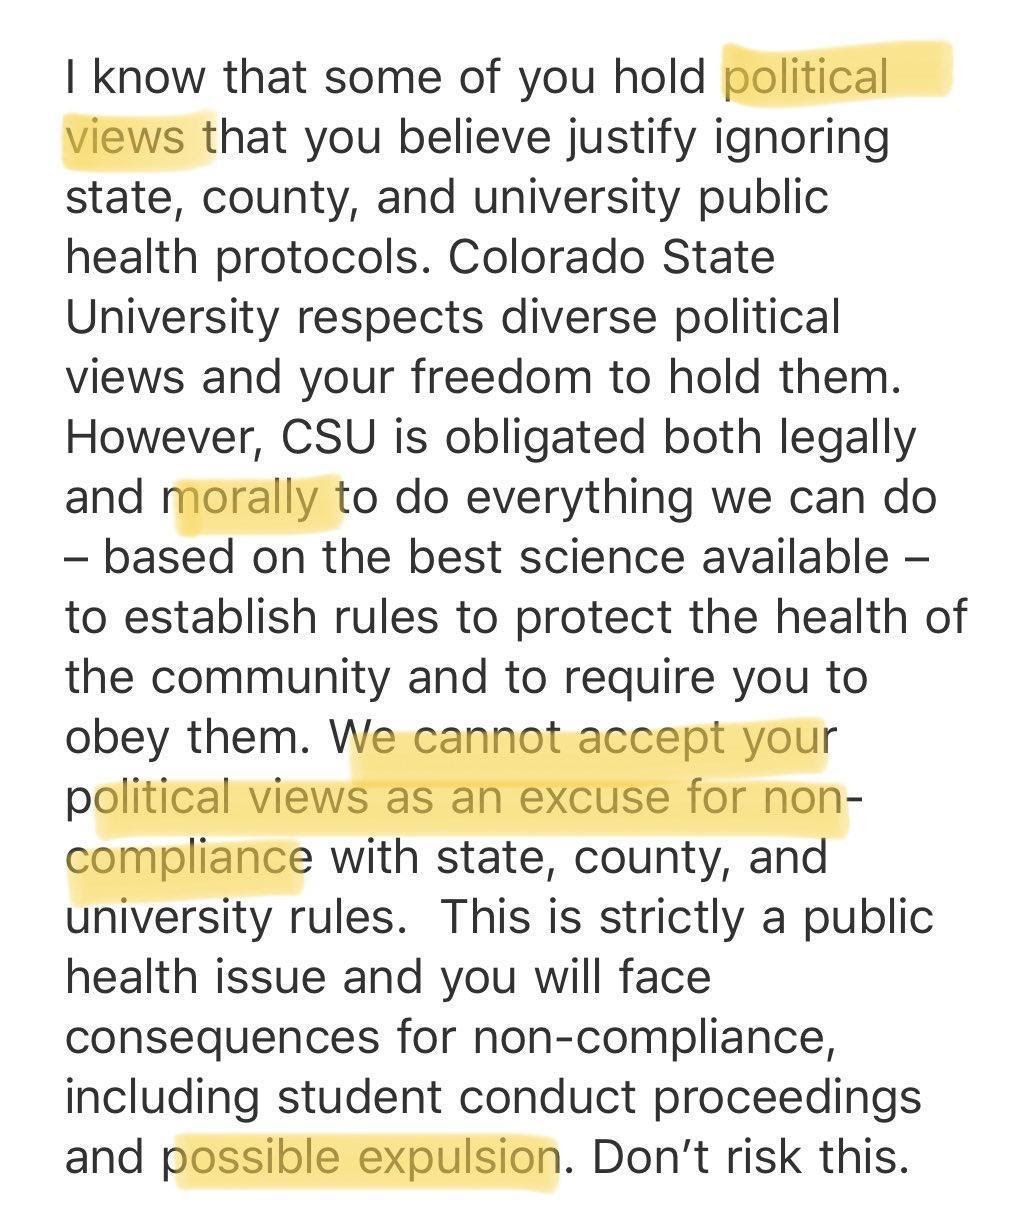 A screen shot provided by an anonymous current Colorado State University student.